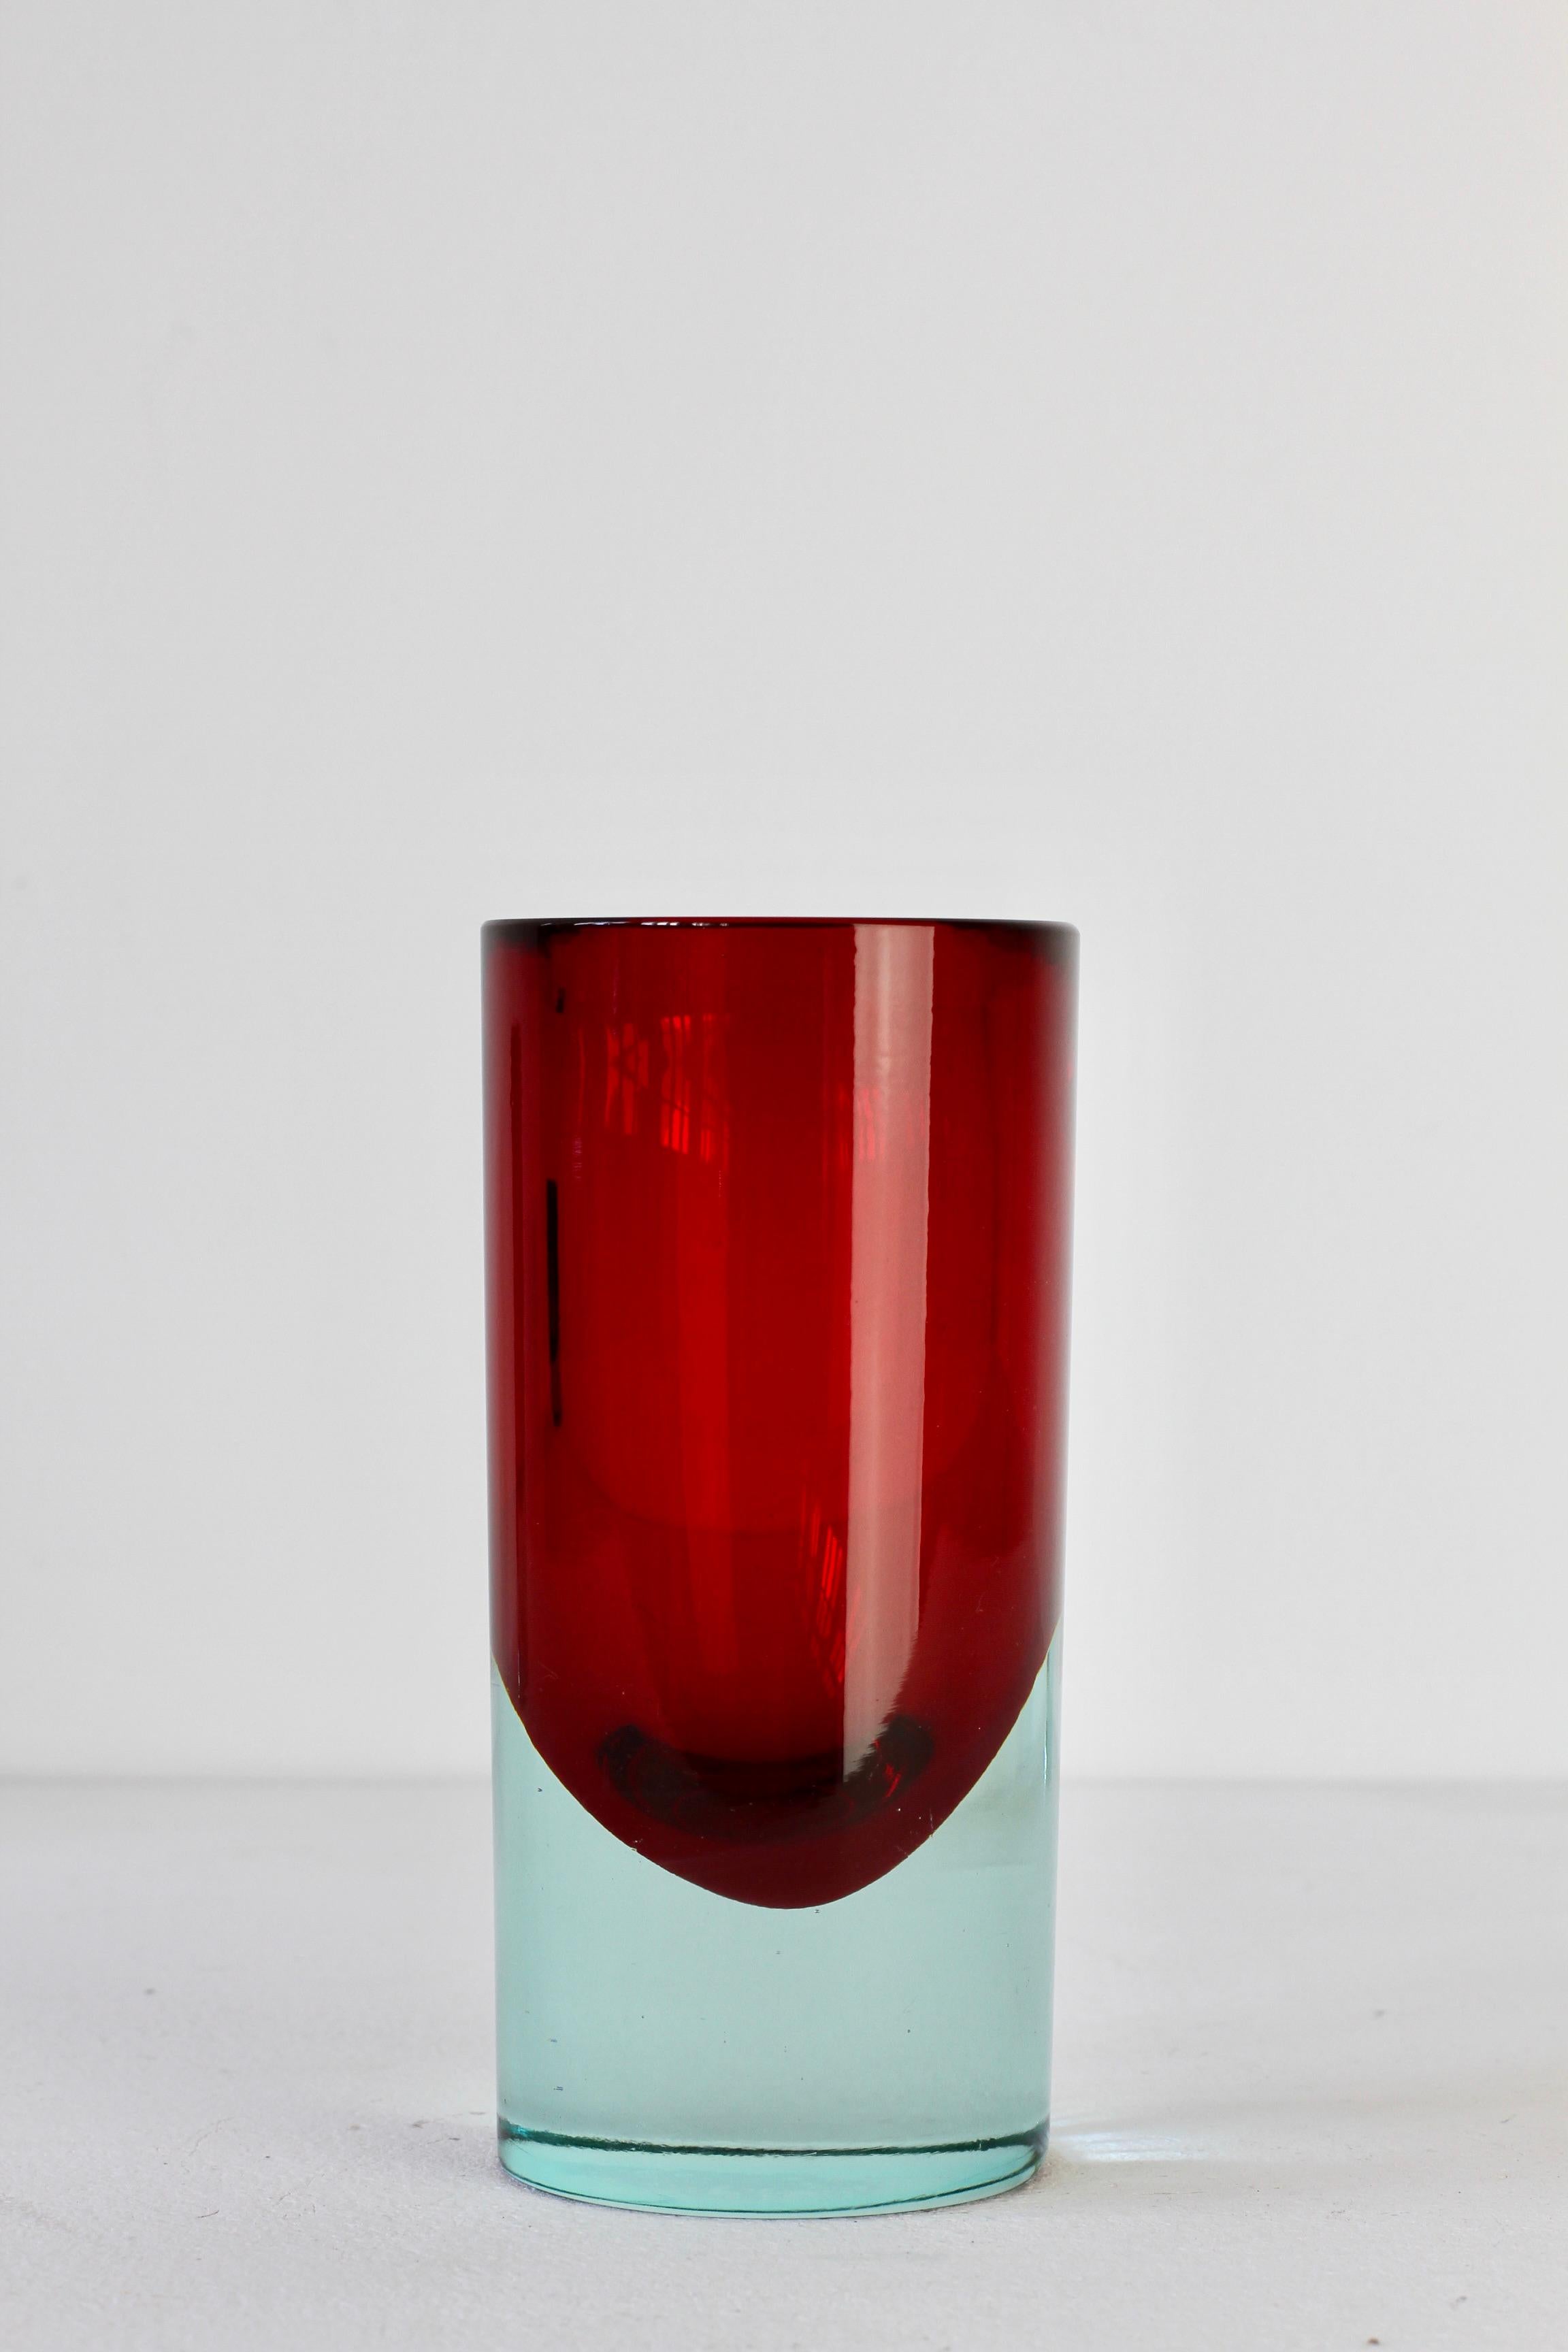 Vintage midcentury Italian Murano glass vase, circa 1965-1975. Made using the Sommerso (submerged) glass technique with a light blue / clear layer over red colored glass.

The maker is, as yet, unidentified but the style is similar to Murano Glass